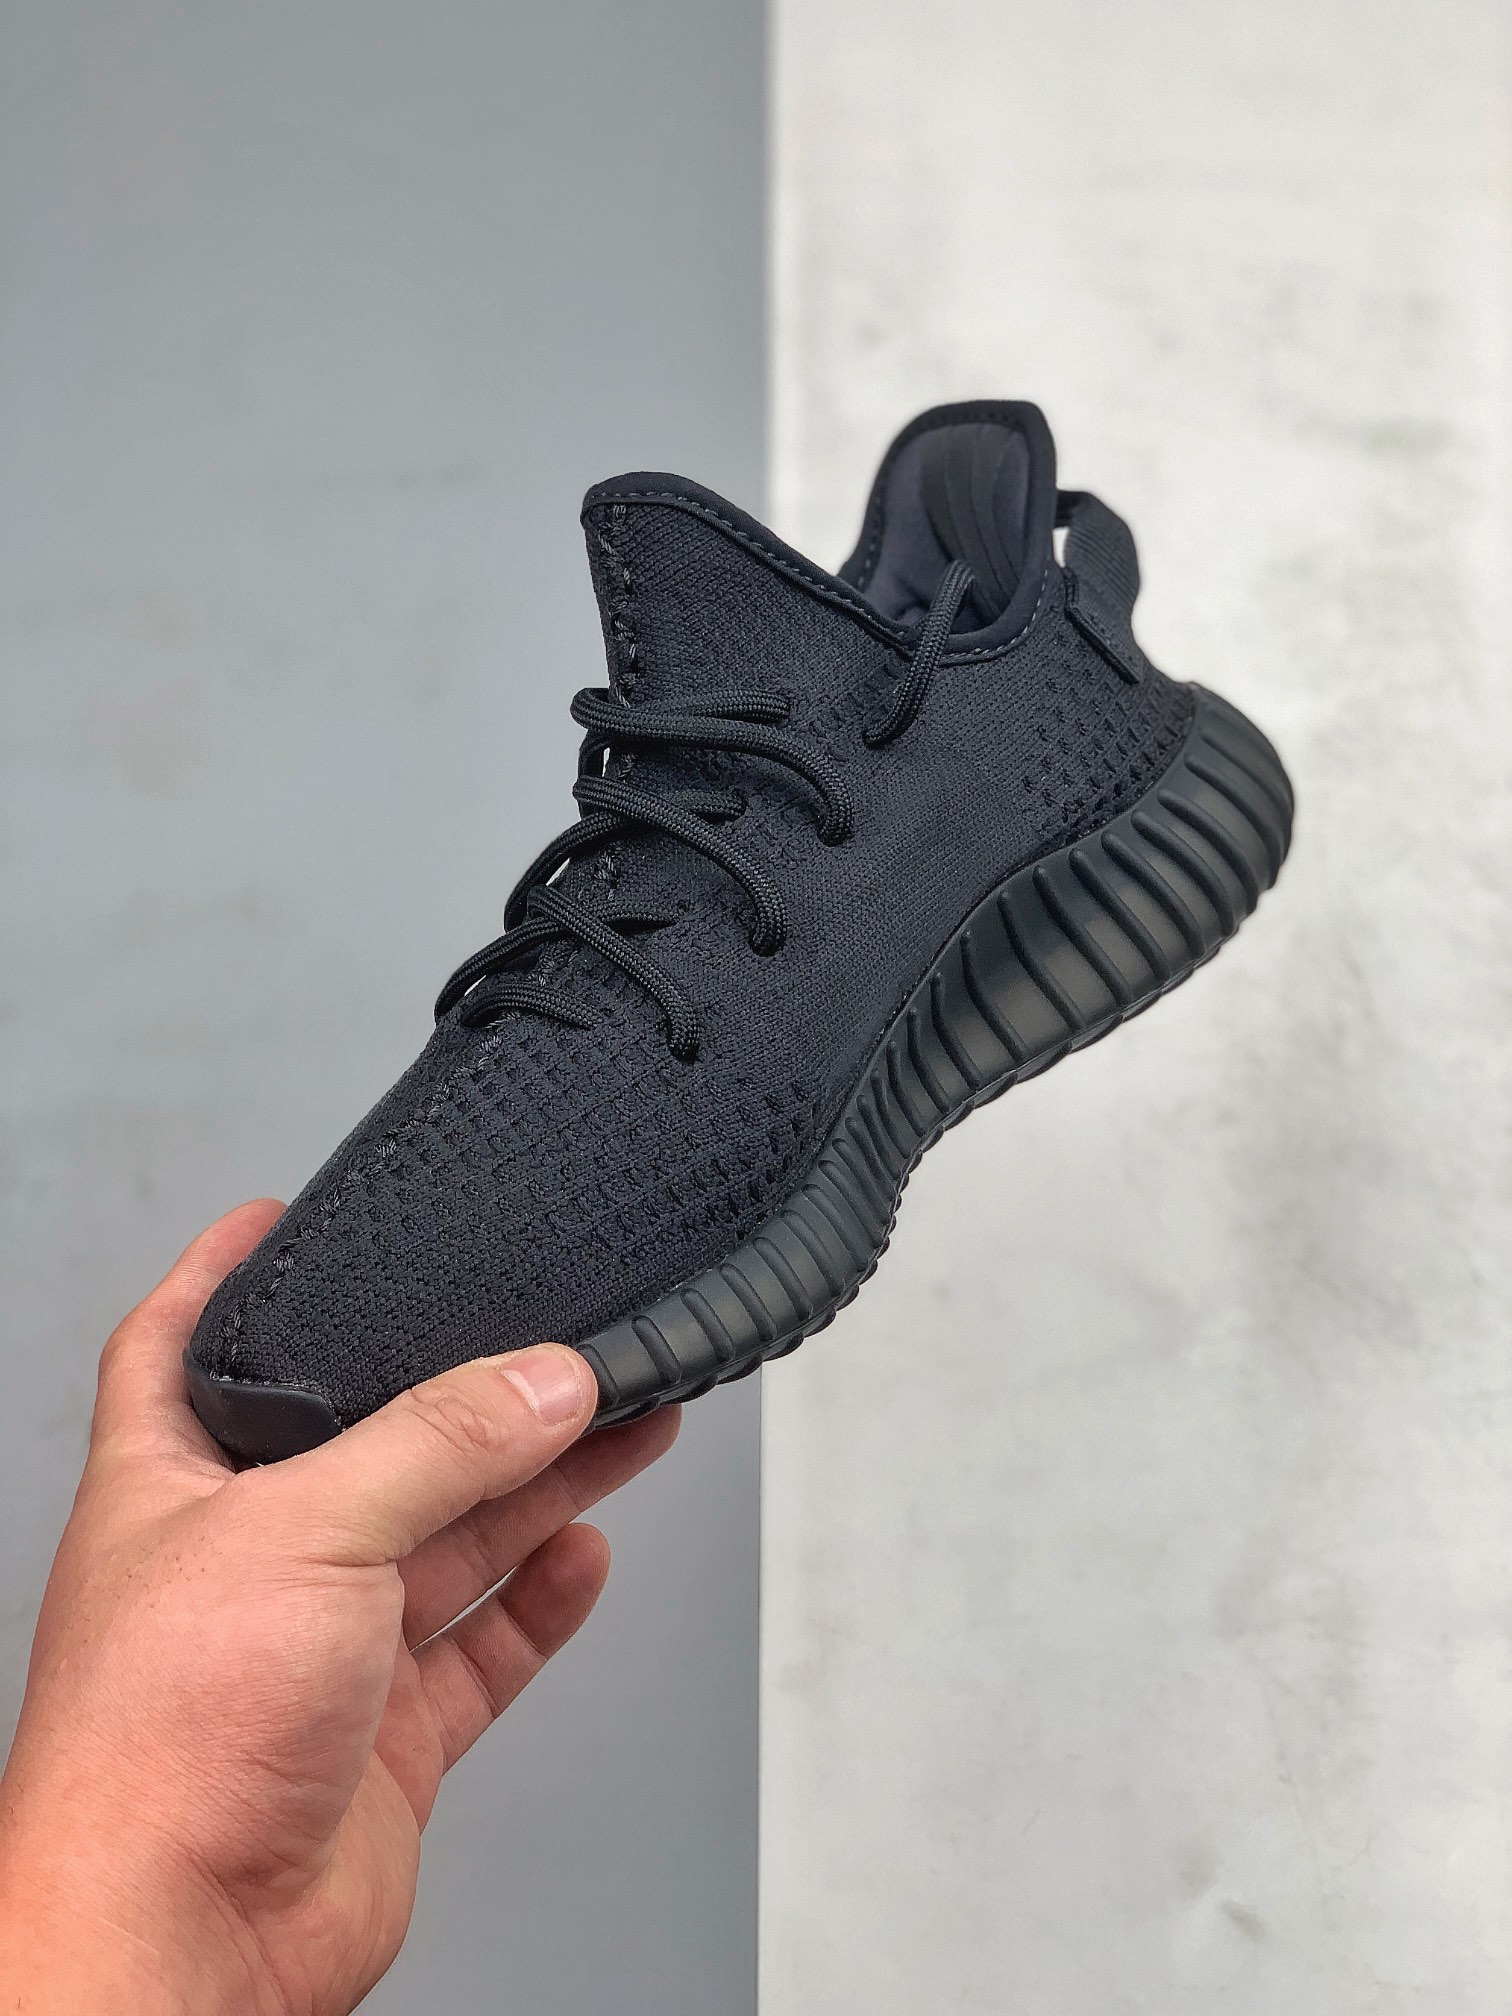 Adidas Yeezy Boost 350 V2 Cinder FY2903 - Shop Authentic Adidas Sneakers